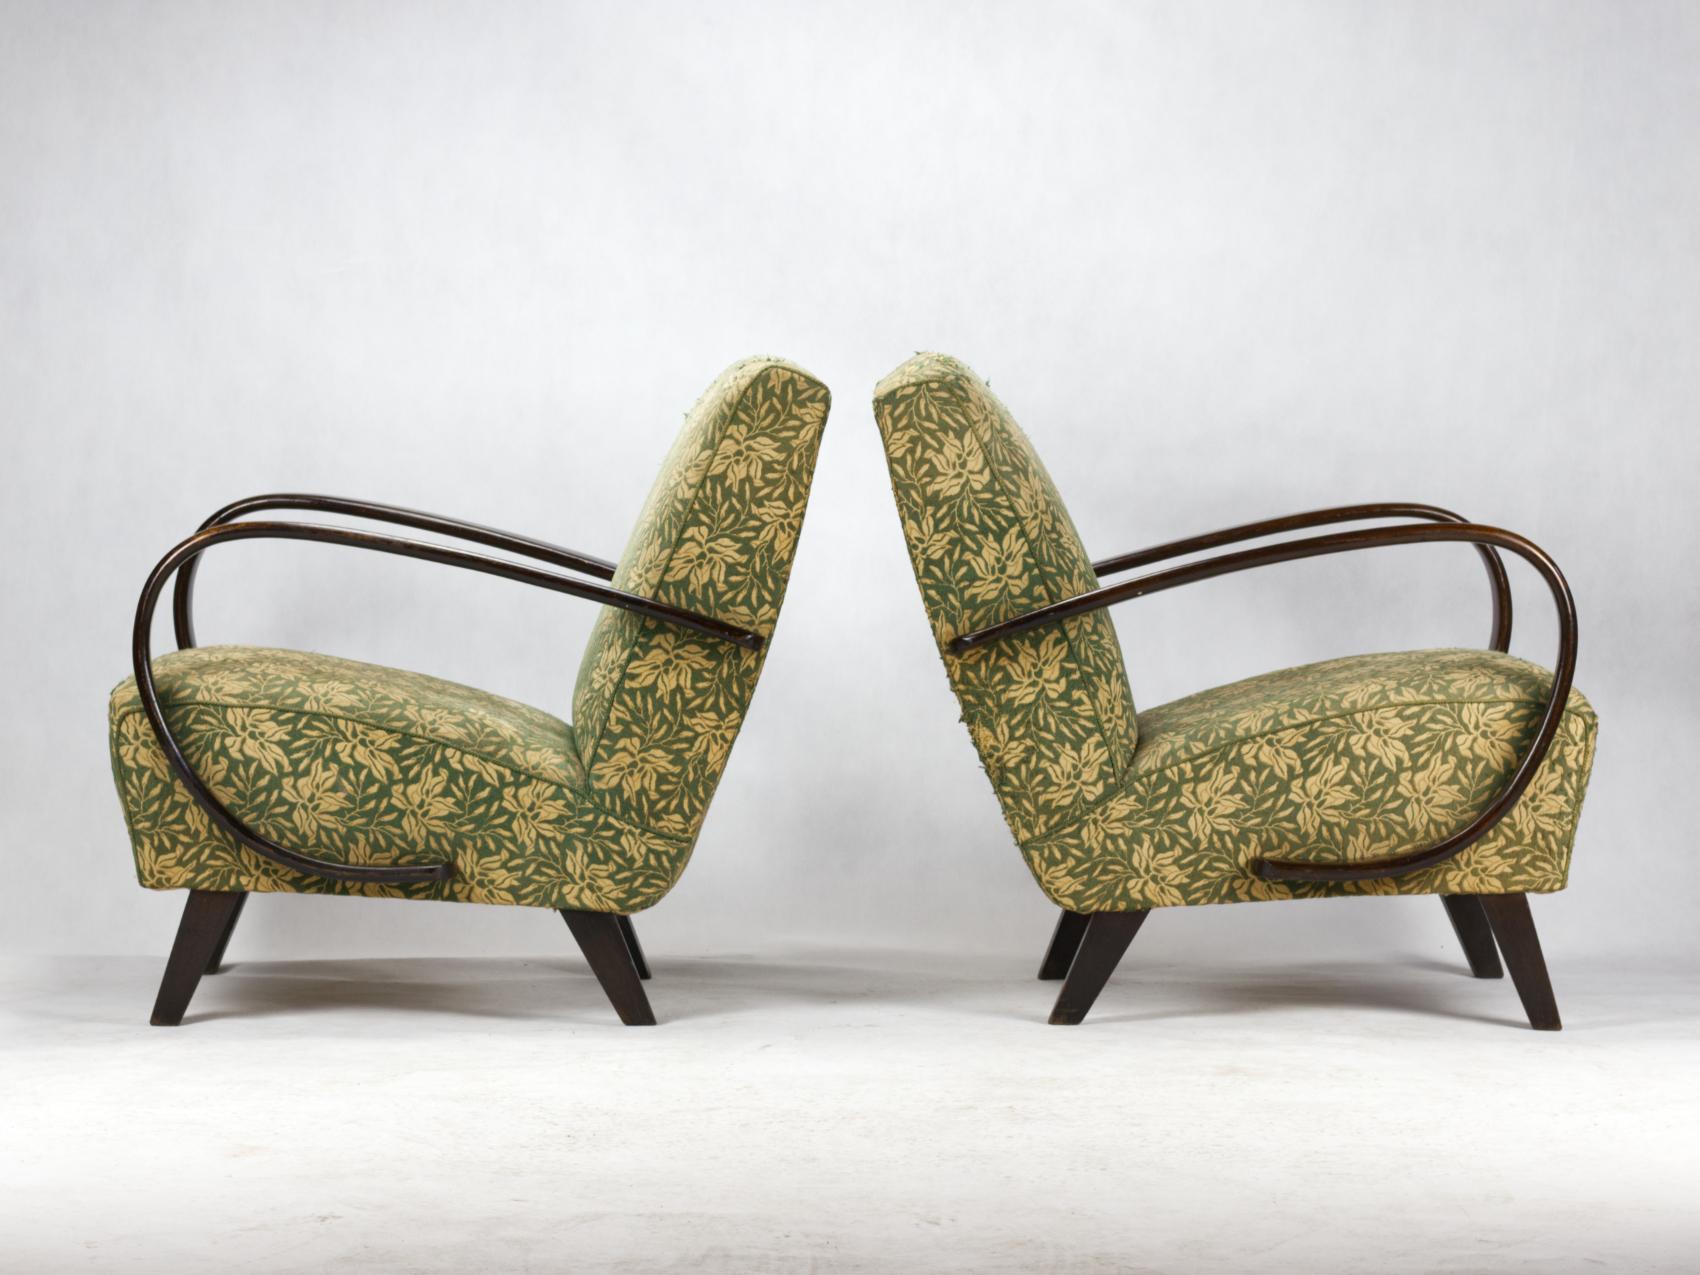 This lounge chairs, model no. 2, were designed by Jindrich Halabala and produced in Czechoslovakia in the 1930s by UP Zavody Brno. The chairs curved armrests and legs made from stained beech and chairs are upholstered in original fabric. The chairs